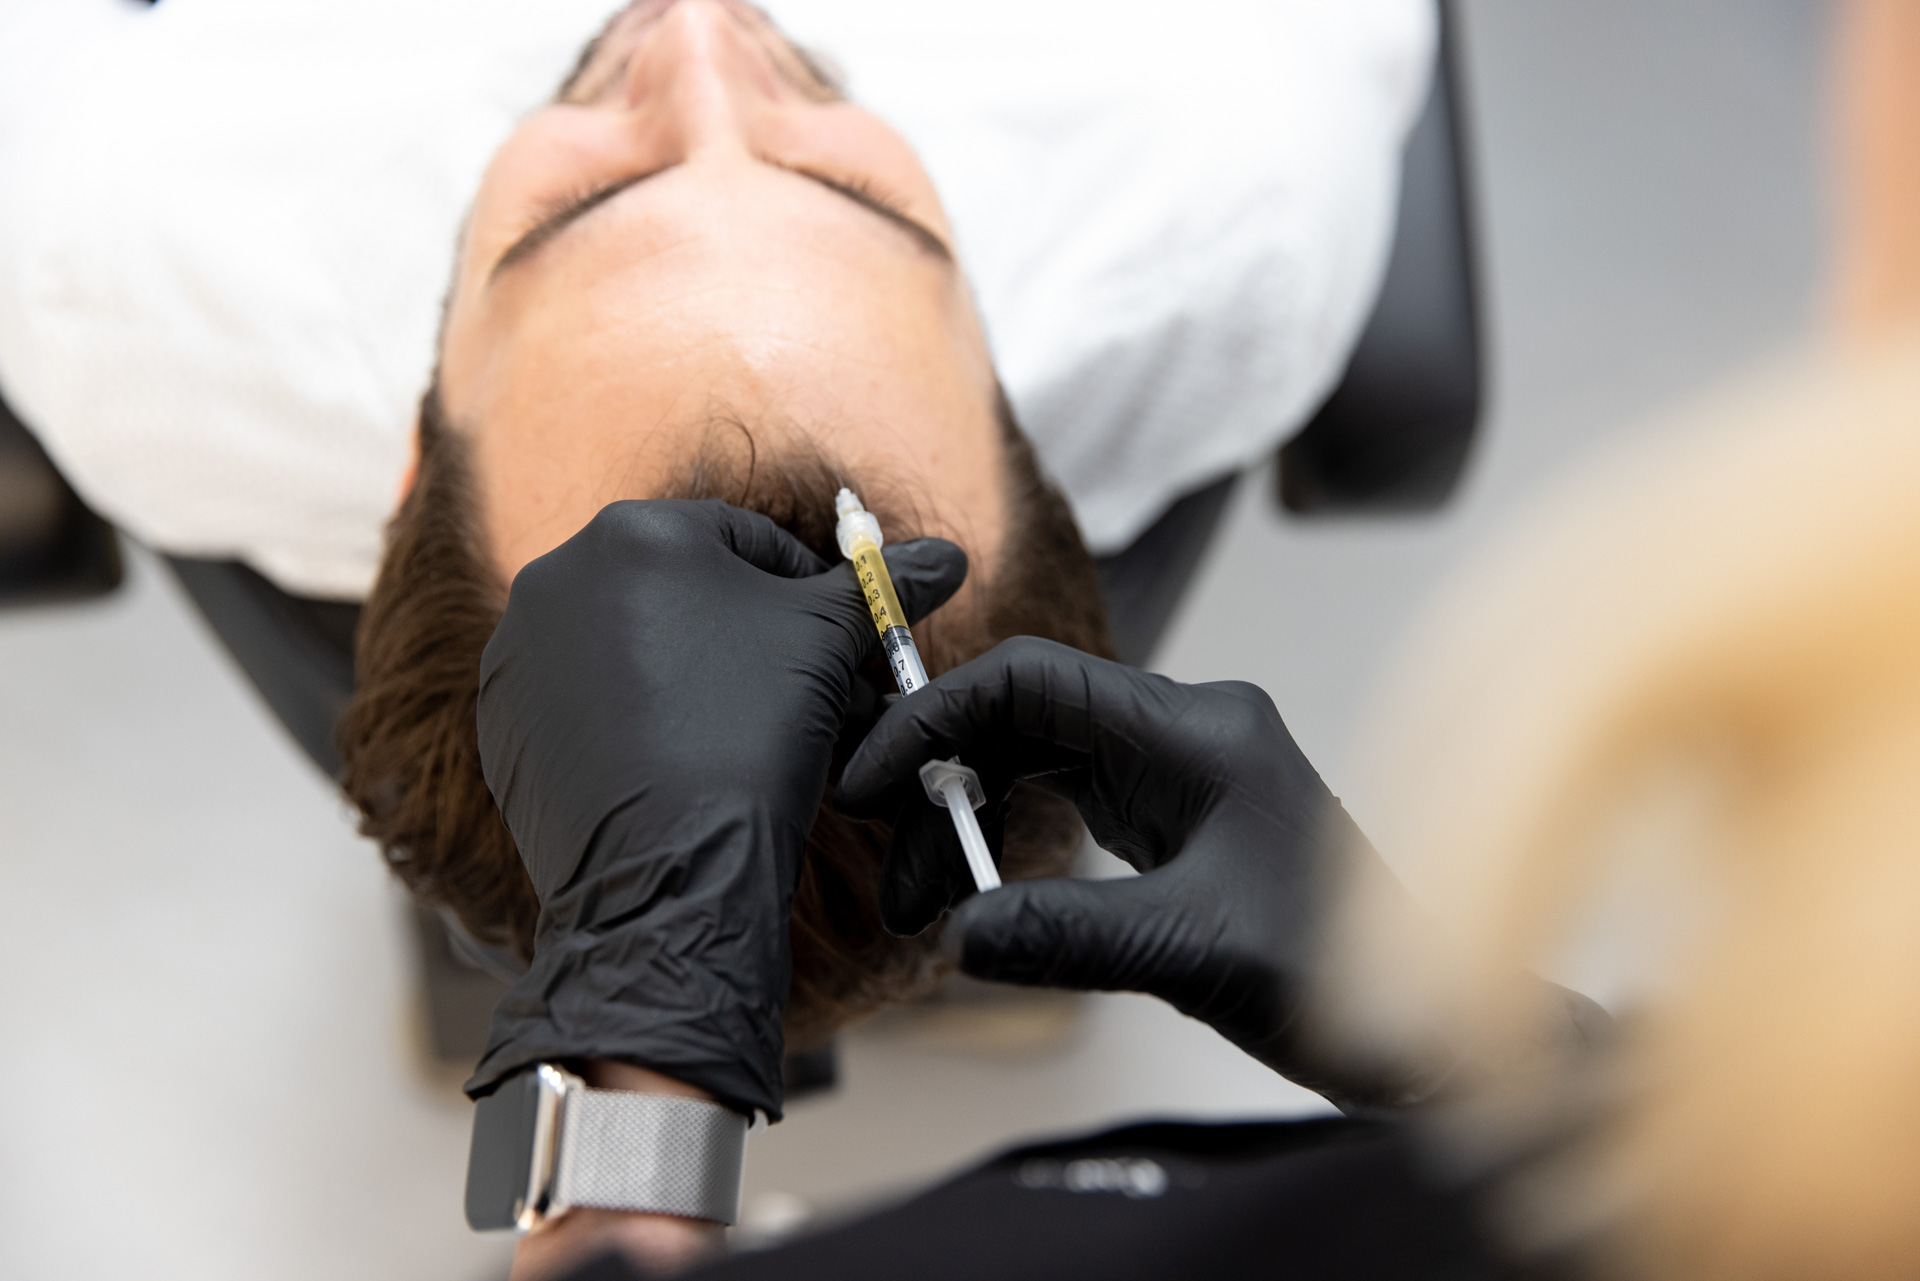 A man gets an injection of PRP at his hair restoration clinic in Menlo Park